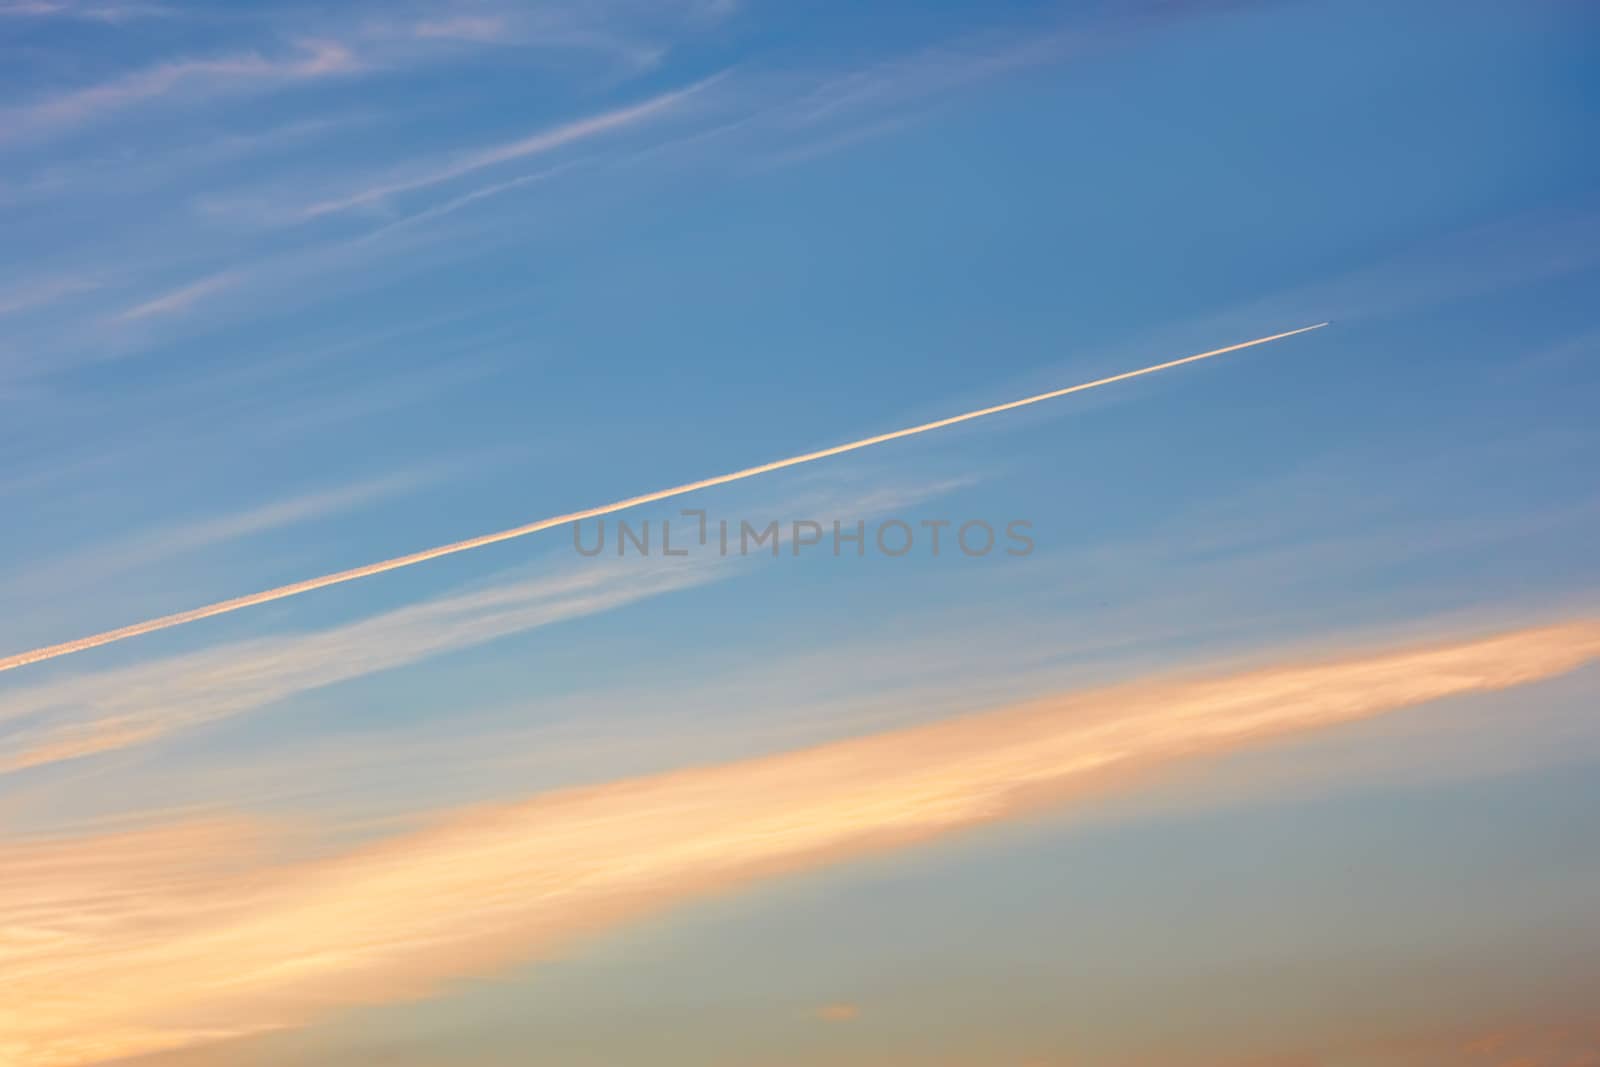 Aircraft track in the evening sky by qiiip